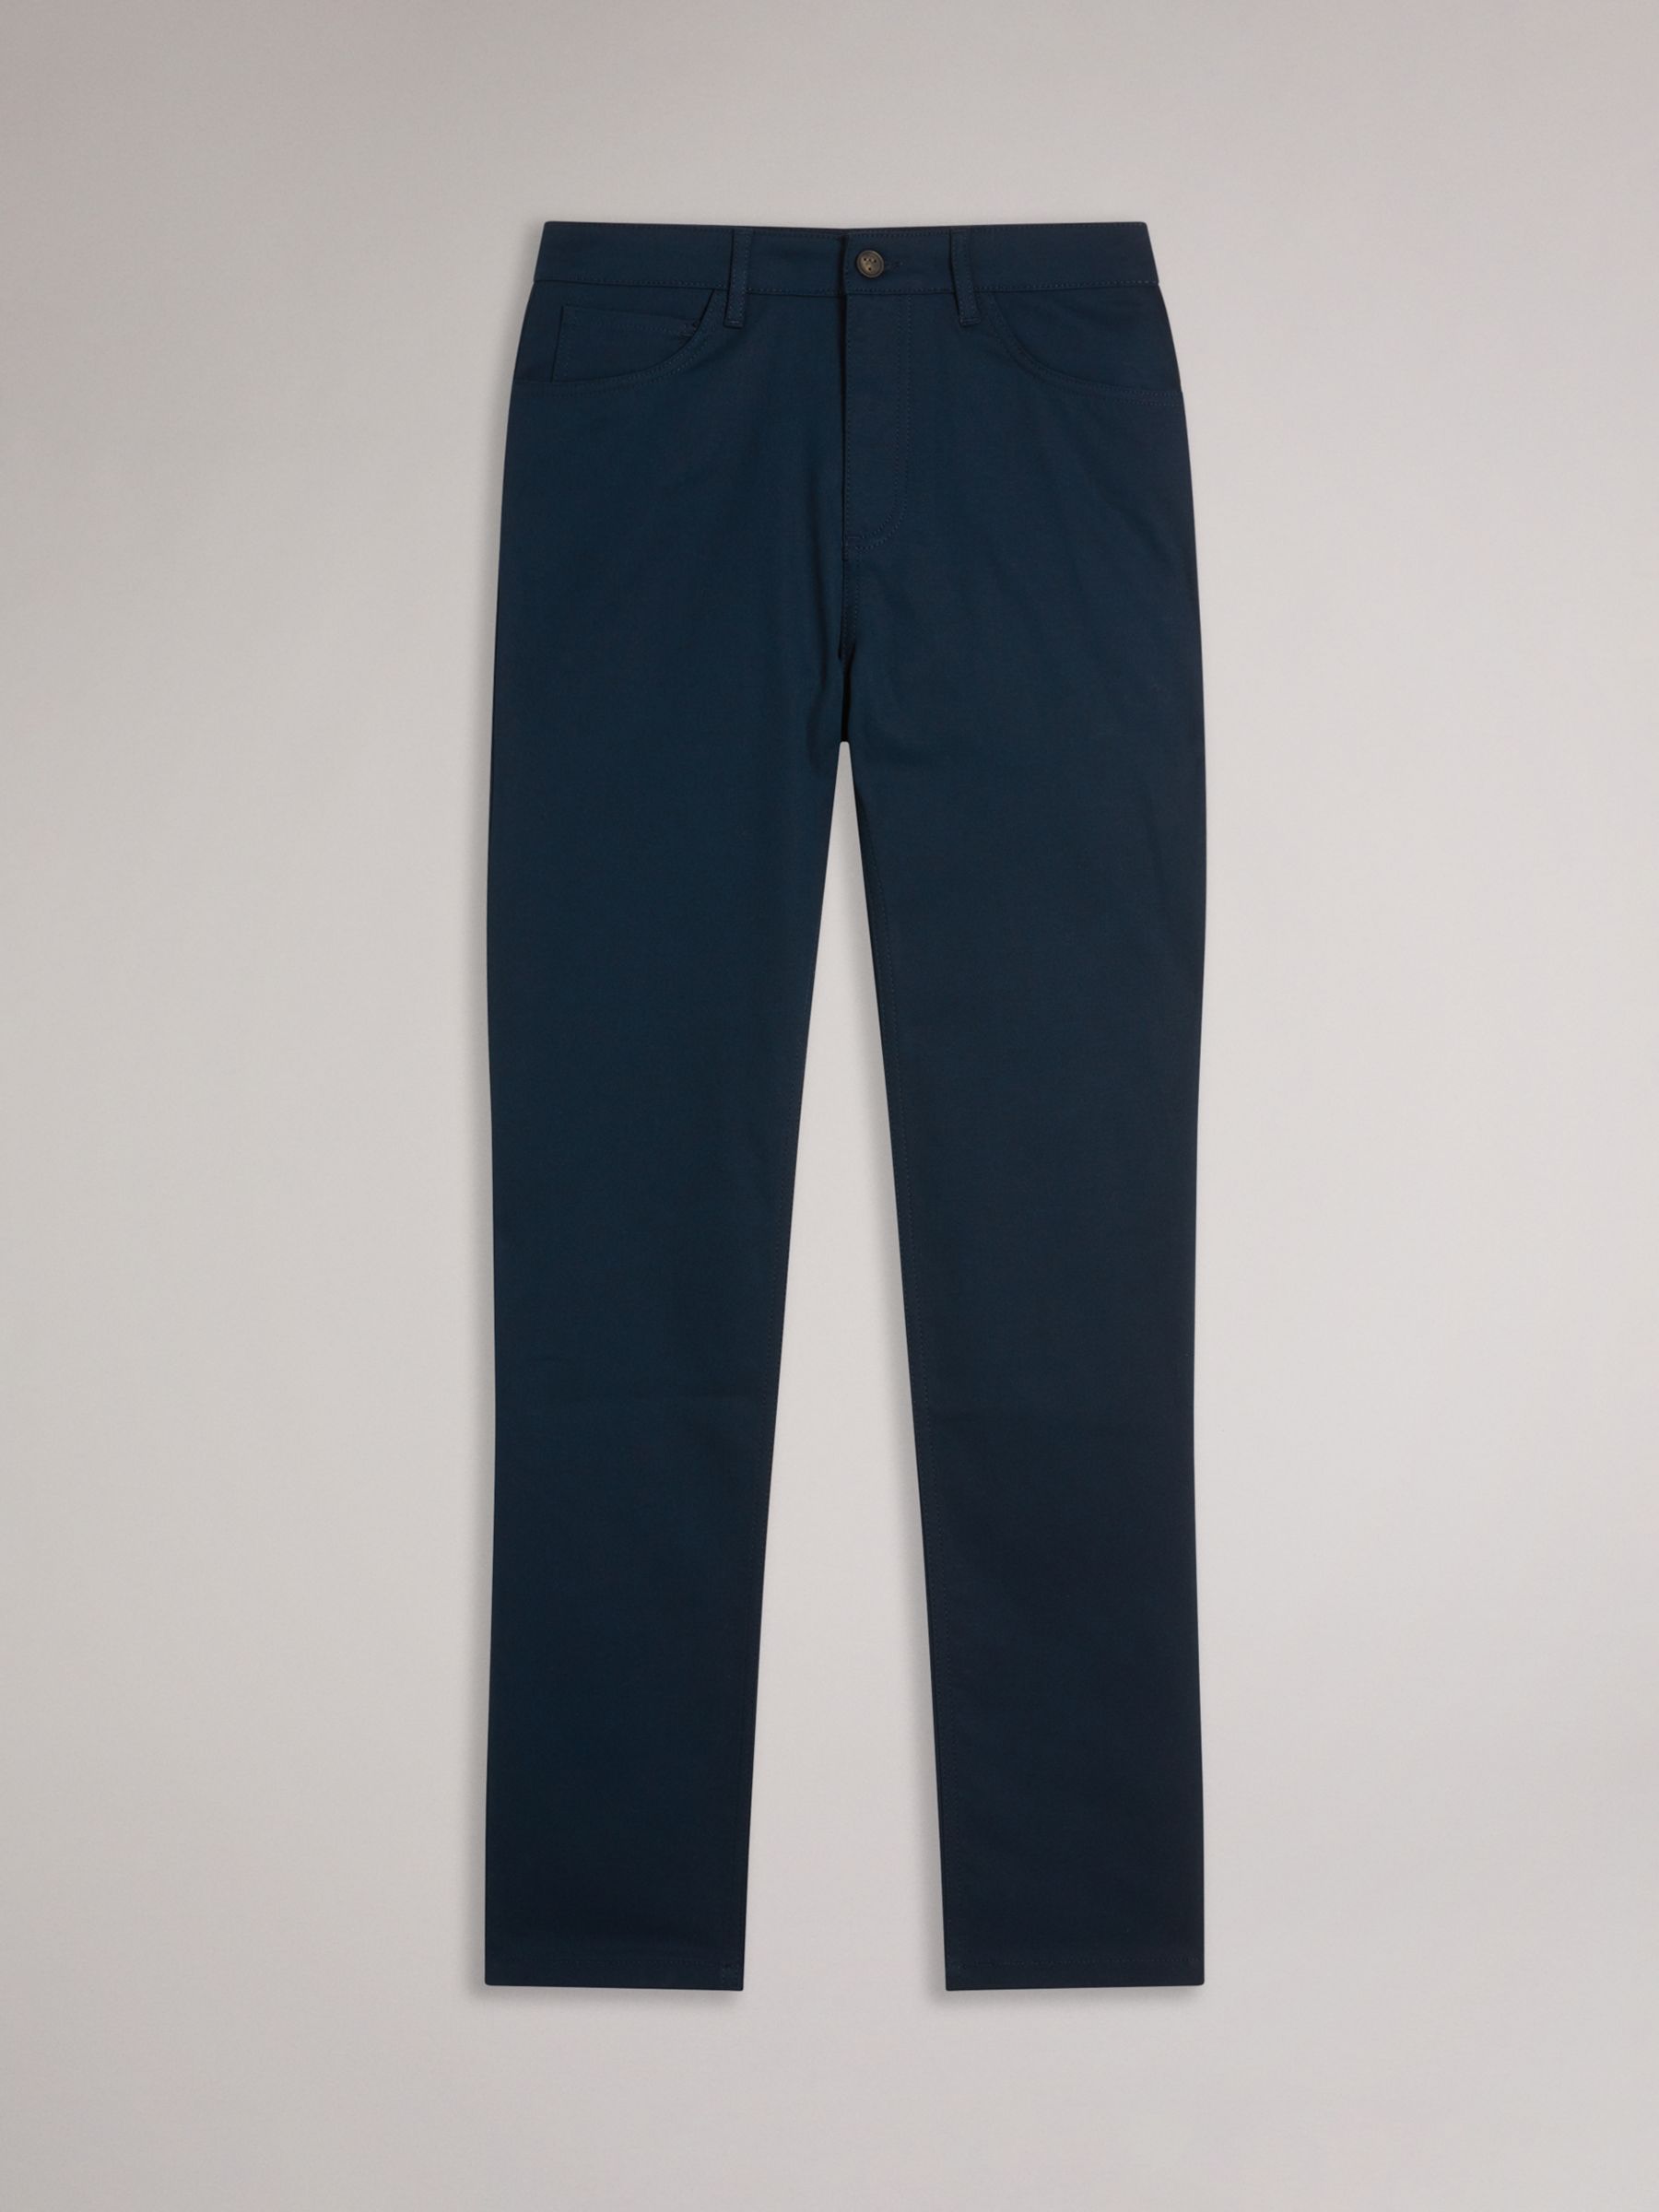 Ted Baker Mansurt Twill Trousers, Navy at John Lewis & Partners